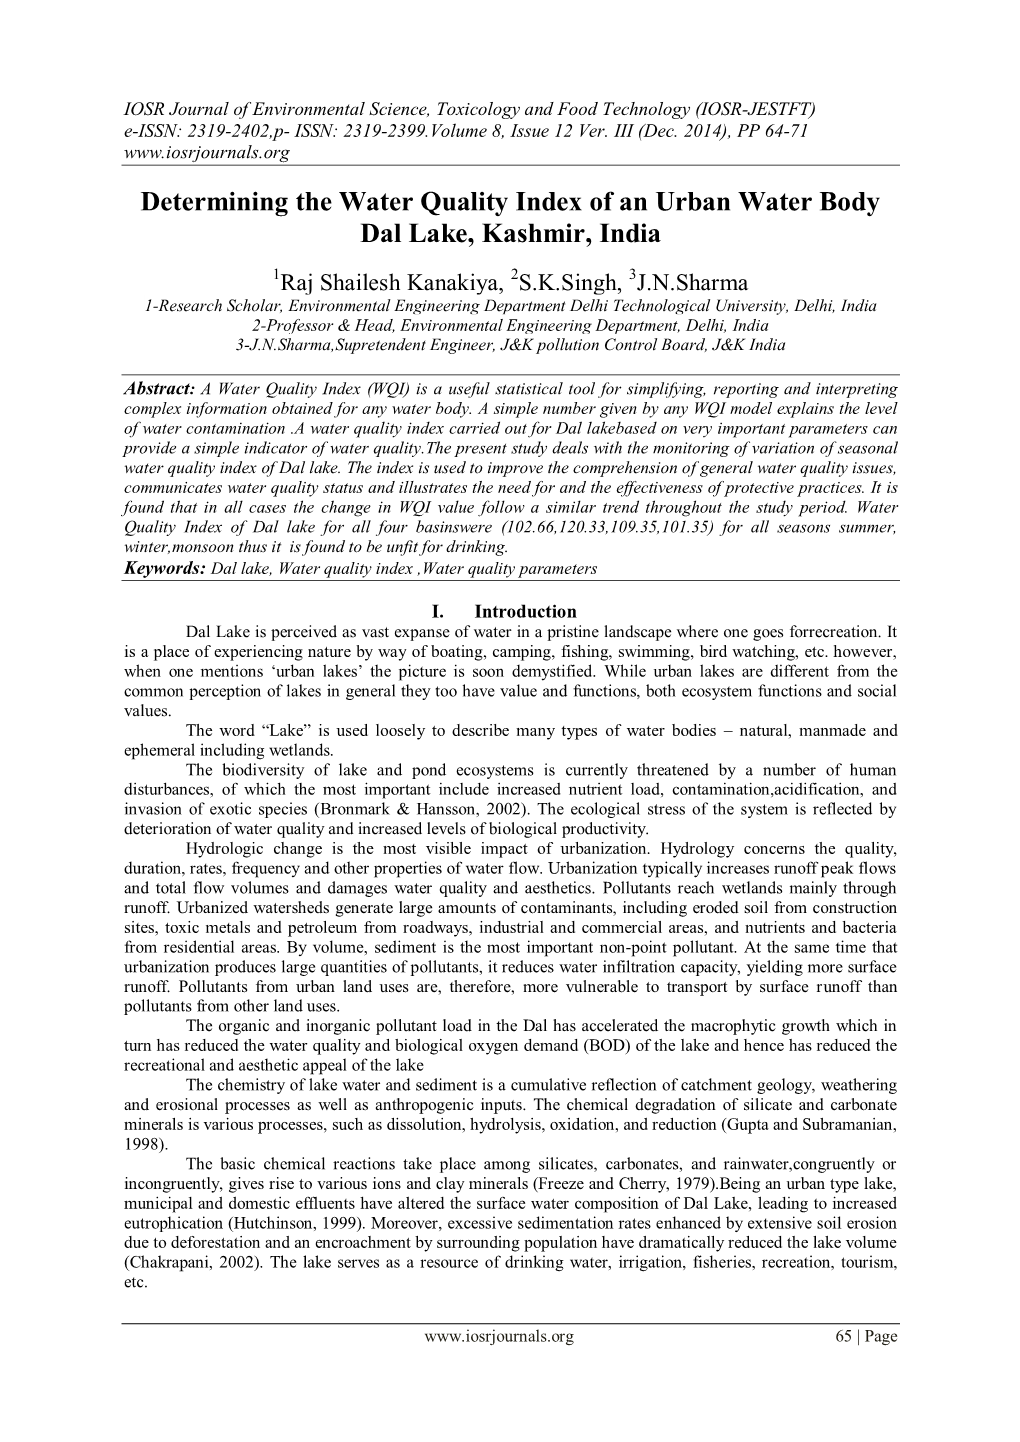 Determining the Water Quality Index of an Urban Water Body Dal Lake, Kashmir, India